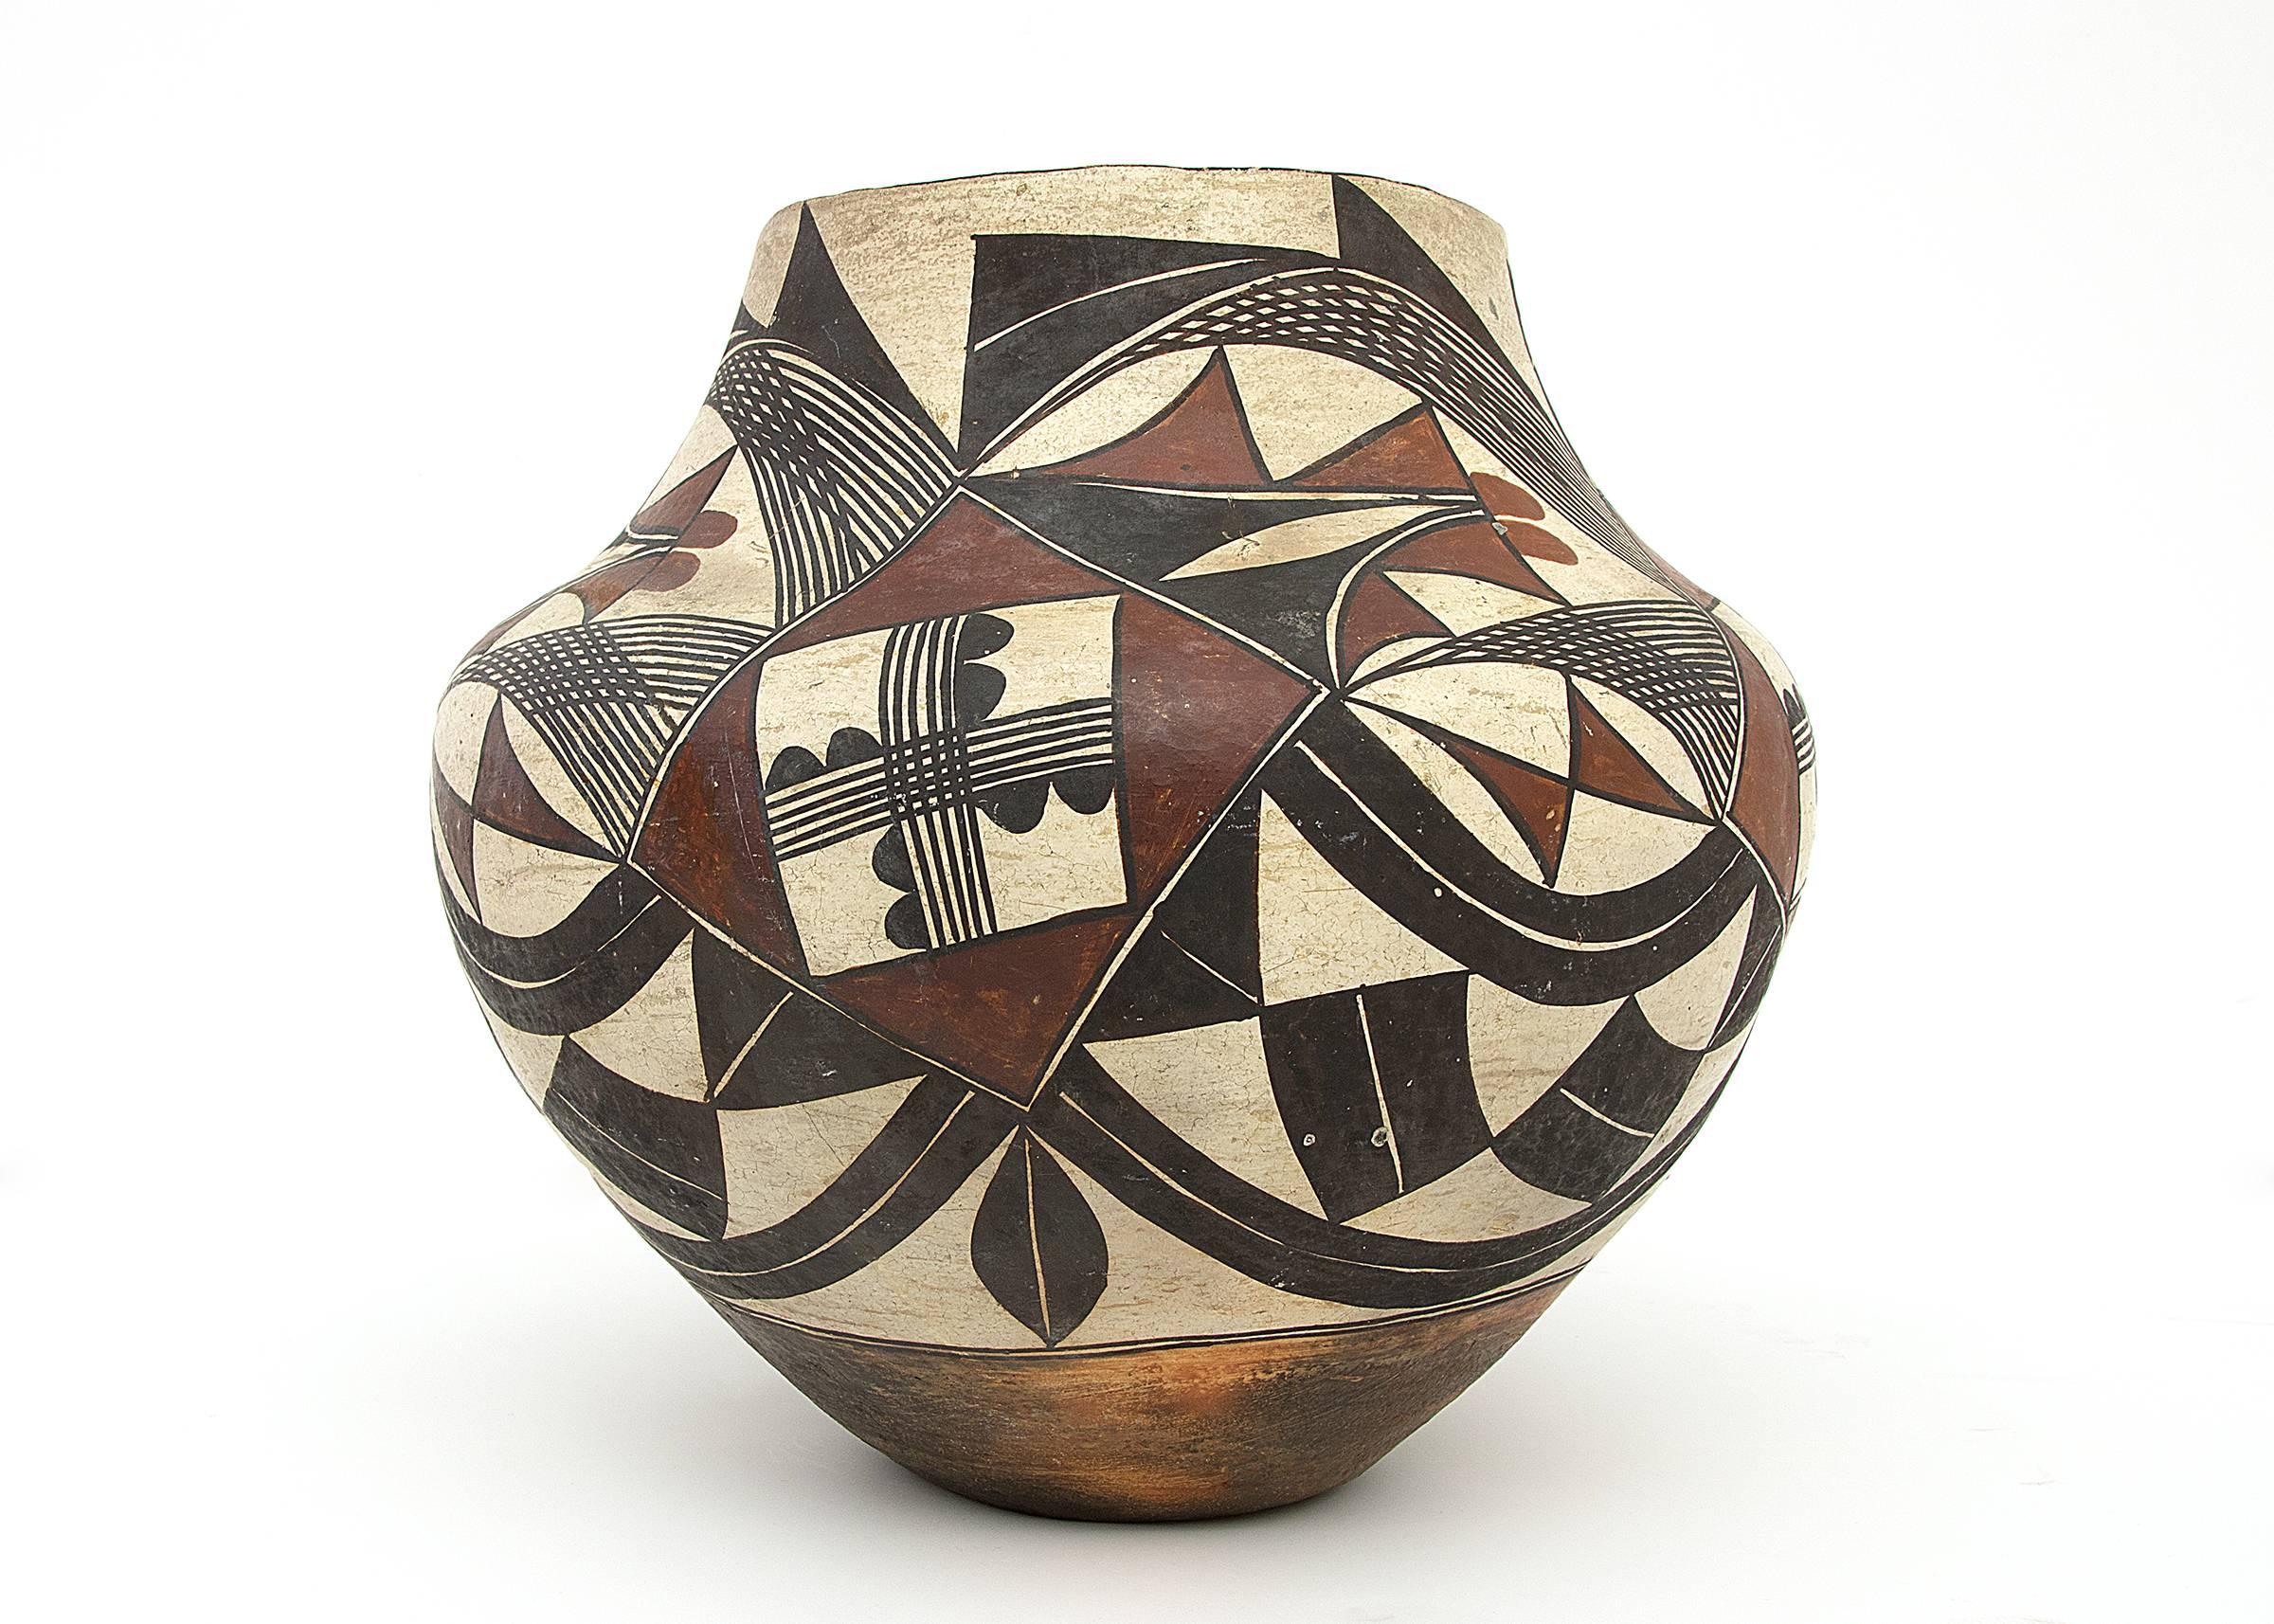 Built by hand from native clay by an American Indian potter at Acoma Pueblo and expertly hand-painted with slip glazes in a sophisticated composition comprised of stylized botanical and geometric elements. Acoma Pueblo is located in New Mexico